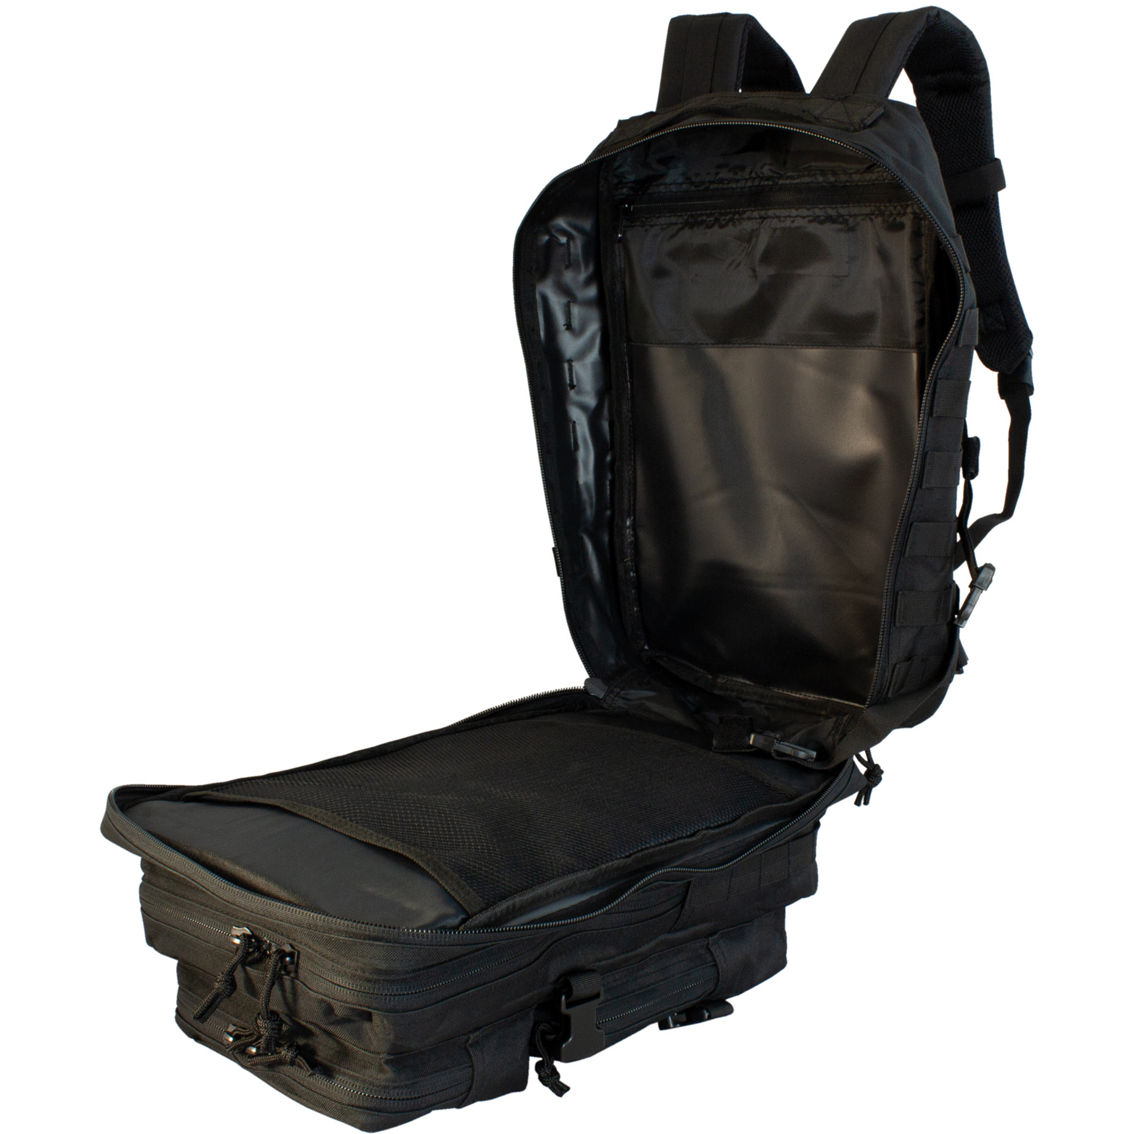 Red Rock Outdoor Gear Large Assault Pack - Image 7 of 7